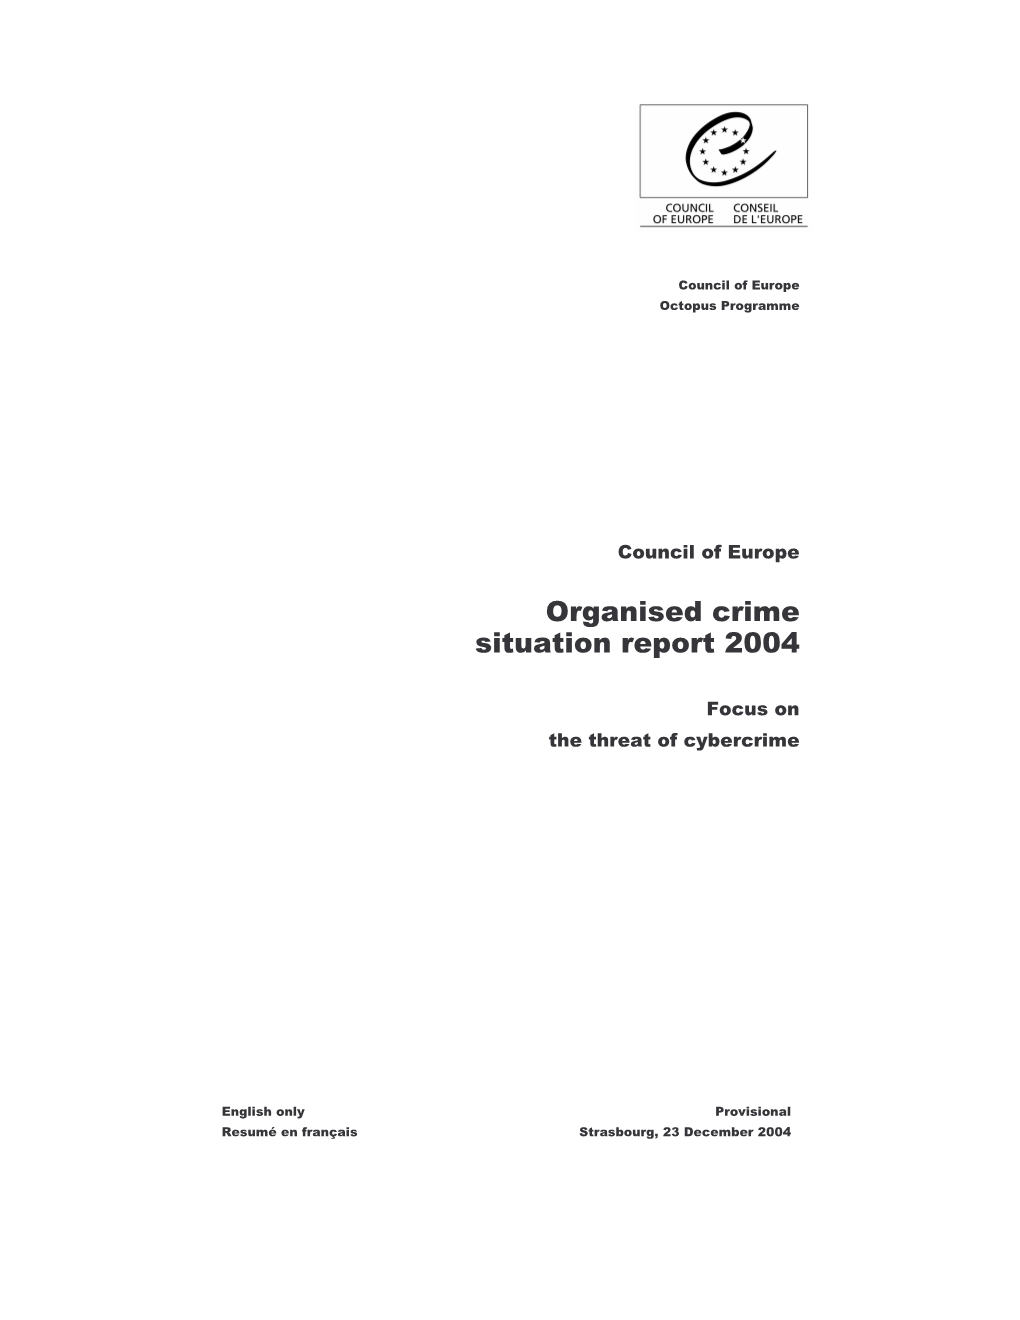 Organised Crime Situation Report 2004